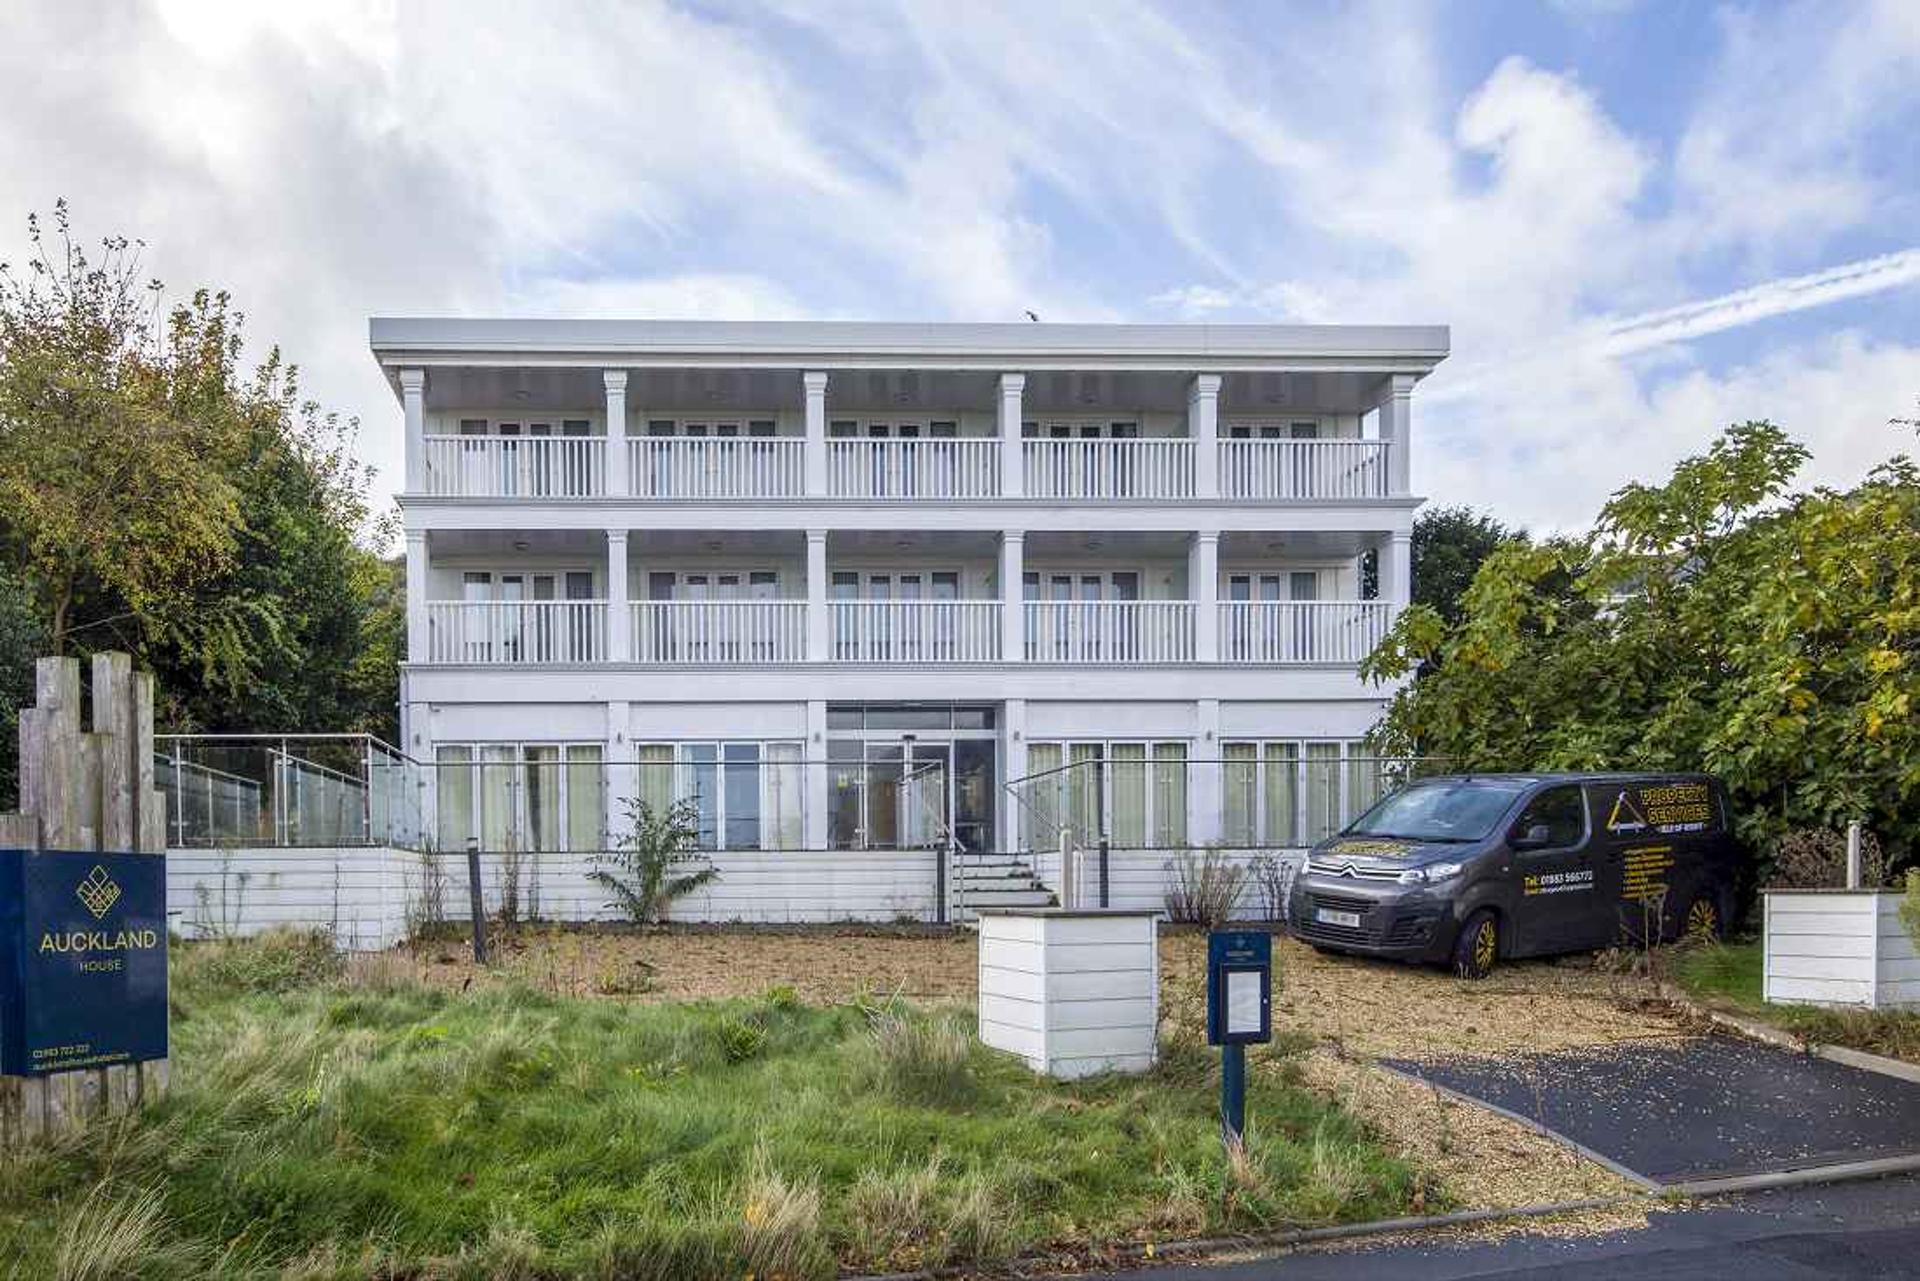 Isle of Wight hotel returns to the market for £900k